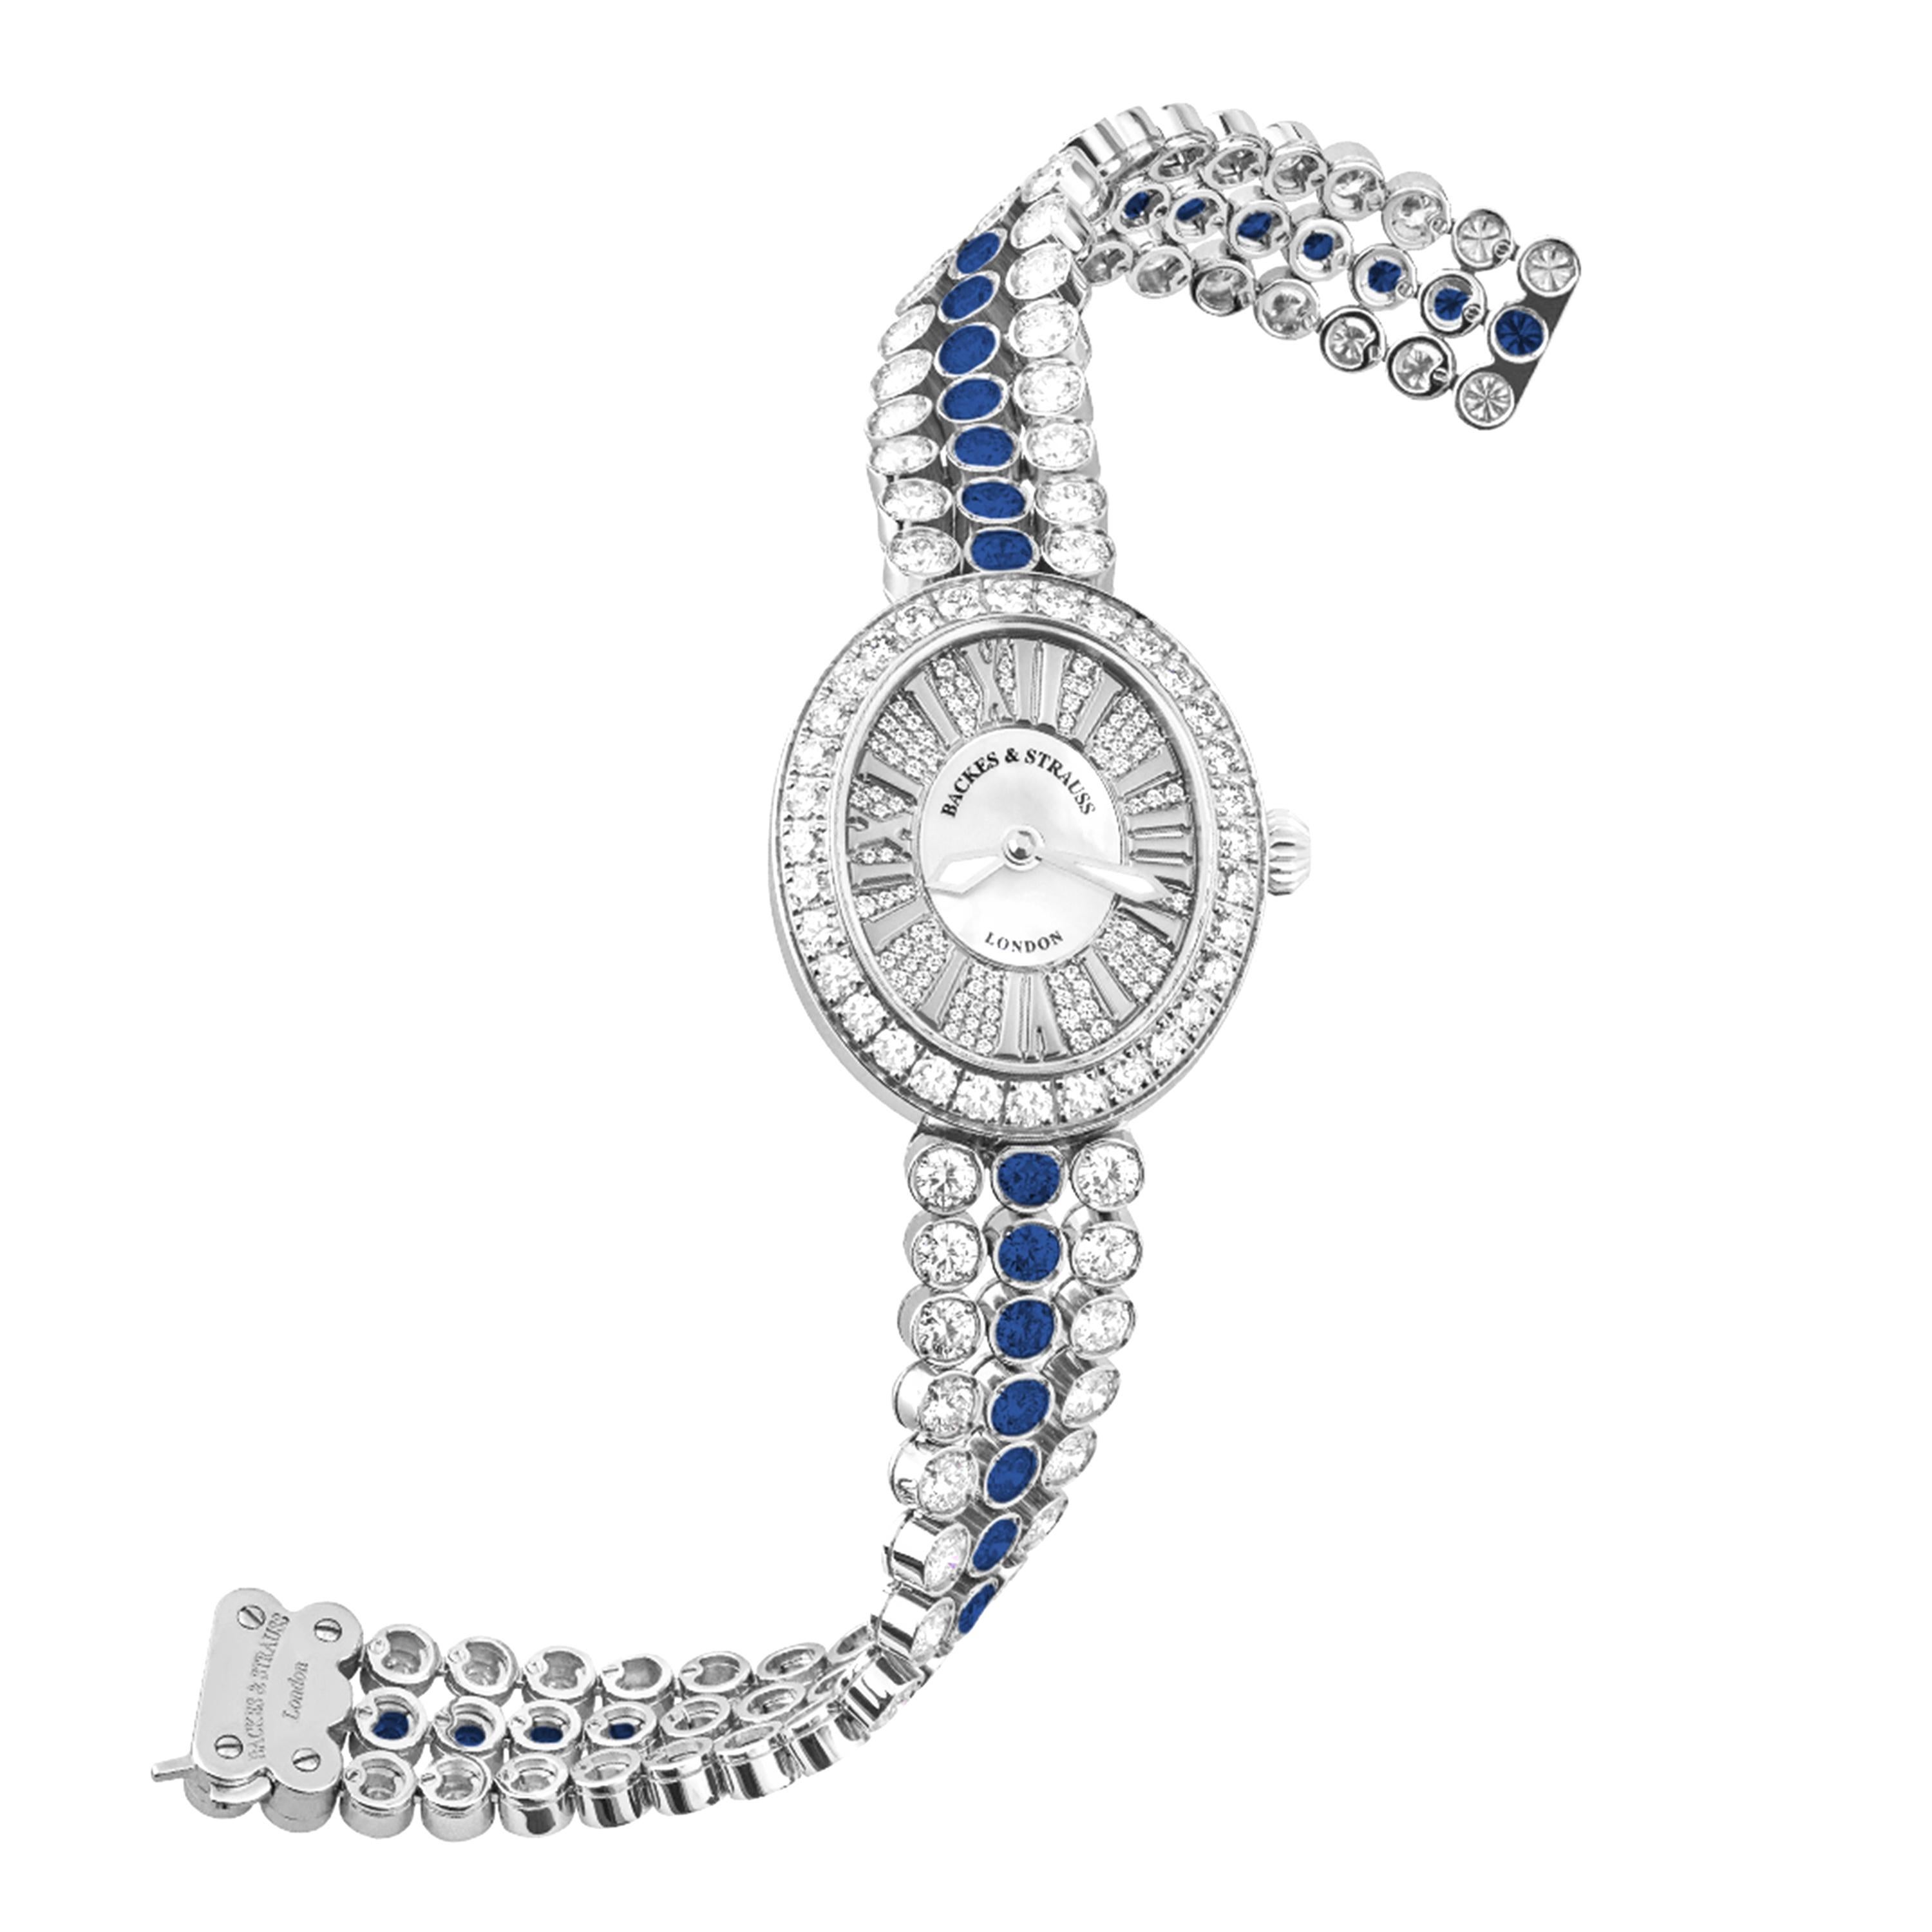 Regent Duchess Blue Velvet 2833 is a luxury diamond watch for women crafted in 18kt White gold, featuring the mother-of-pearl oval dial with the white gold roman numerals, quartz movement. The case, dial and the crown are set with white Ideal Cut